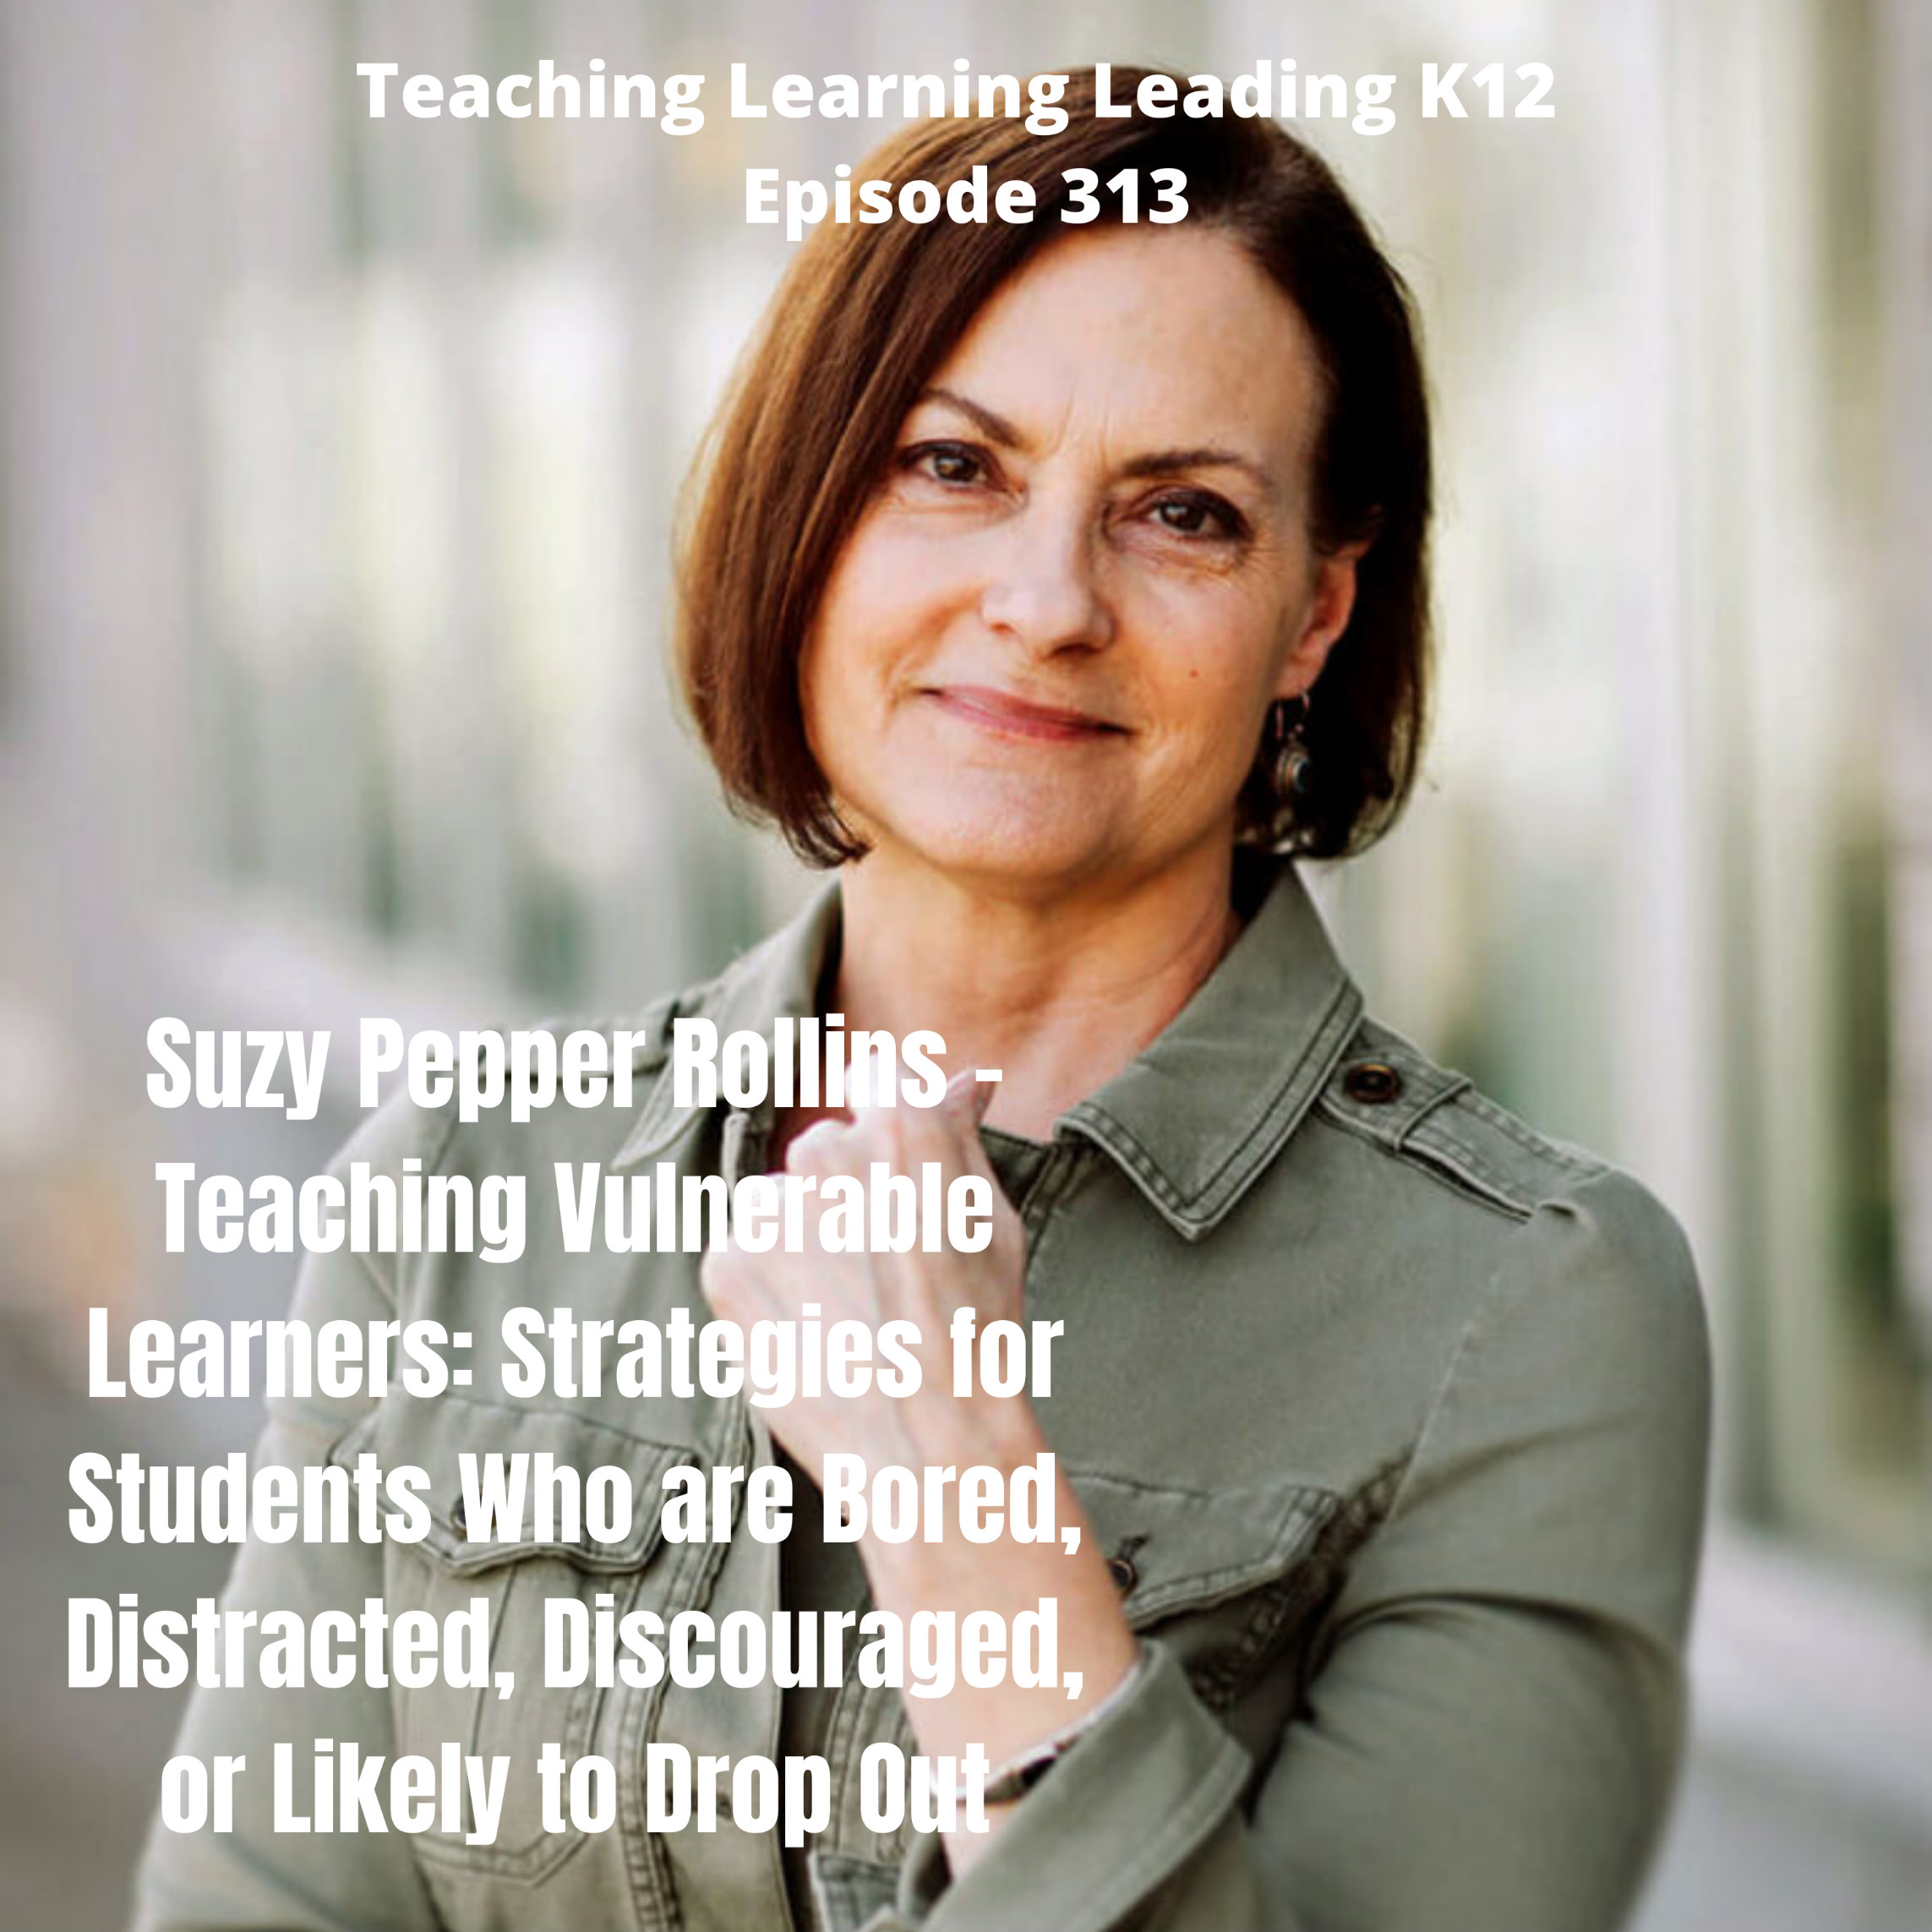 Suzy Pepper Rollins - Teaching Vulnerable Learners: Strategies for Students who are Bored, Distracted, Discouraged, or Likely to Drop Out - 313 Image